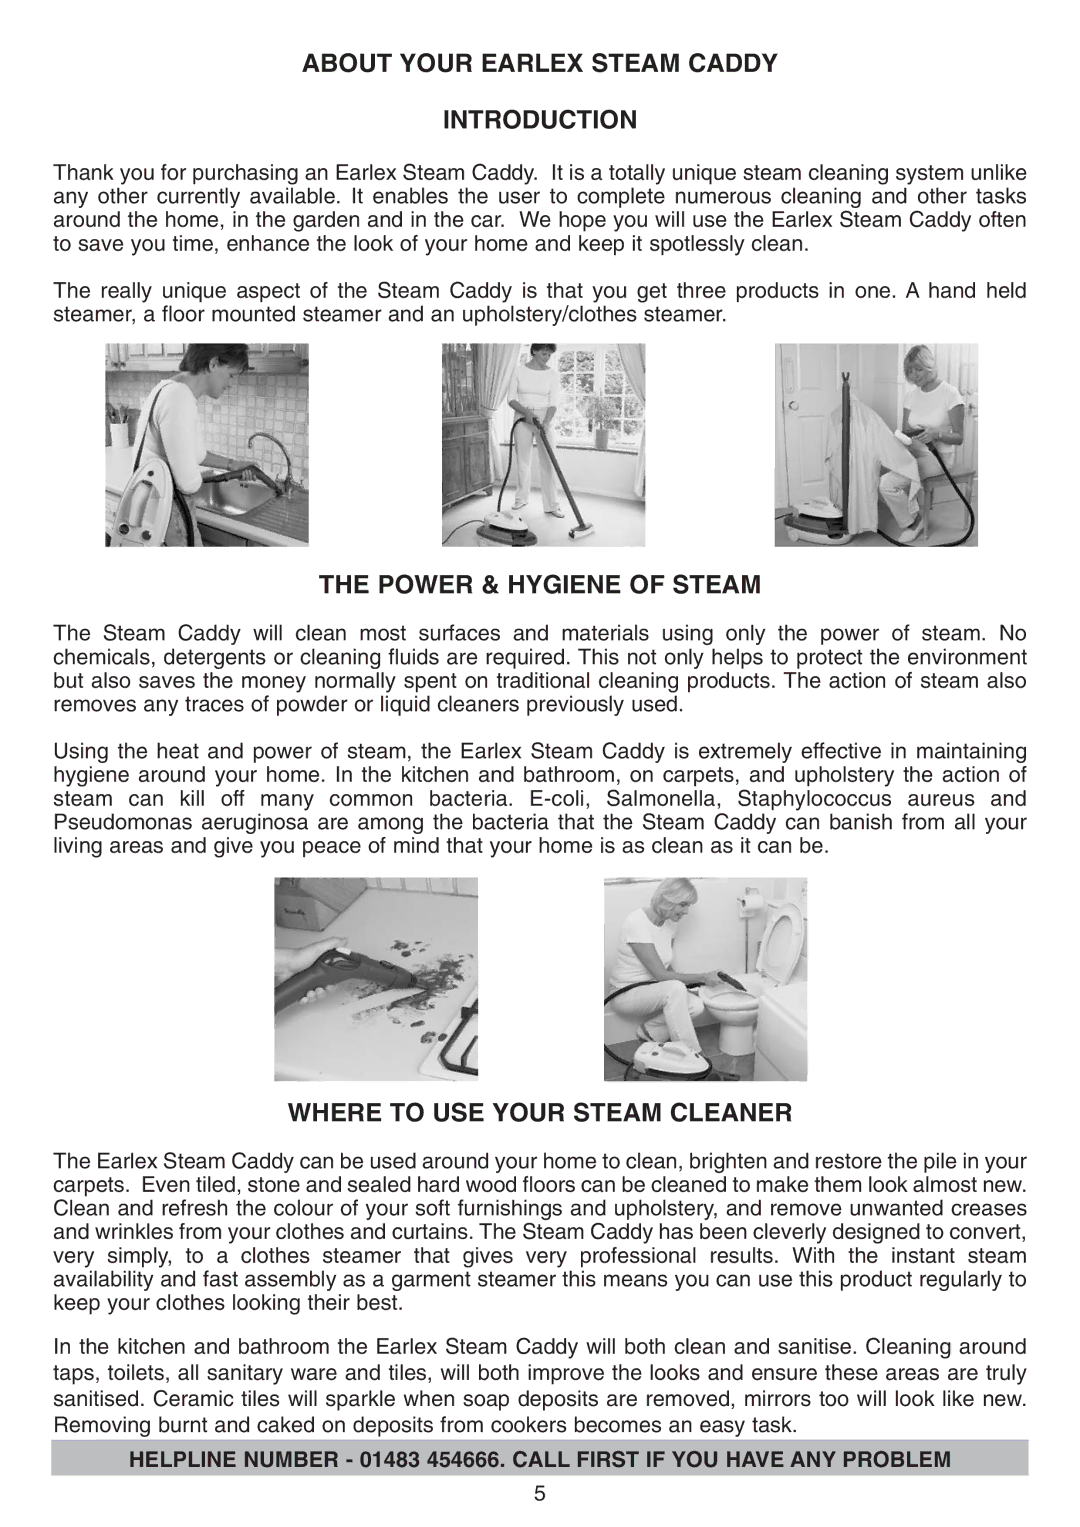 Earlex IS2000 manual About Your Earlex Steam Caddy Introduction, Power & Hygiene of Steam, Where to USE Your Steam Cleaner 